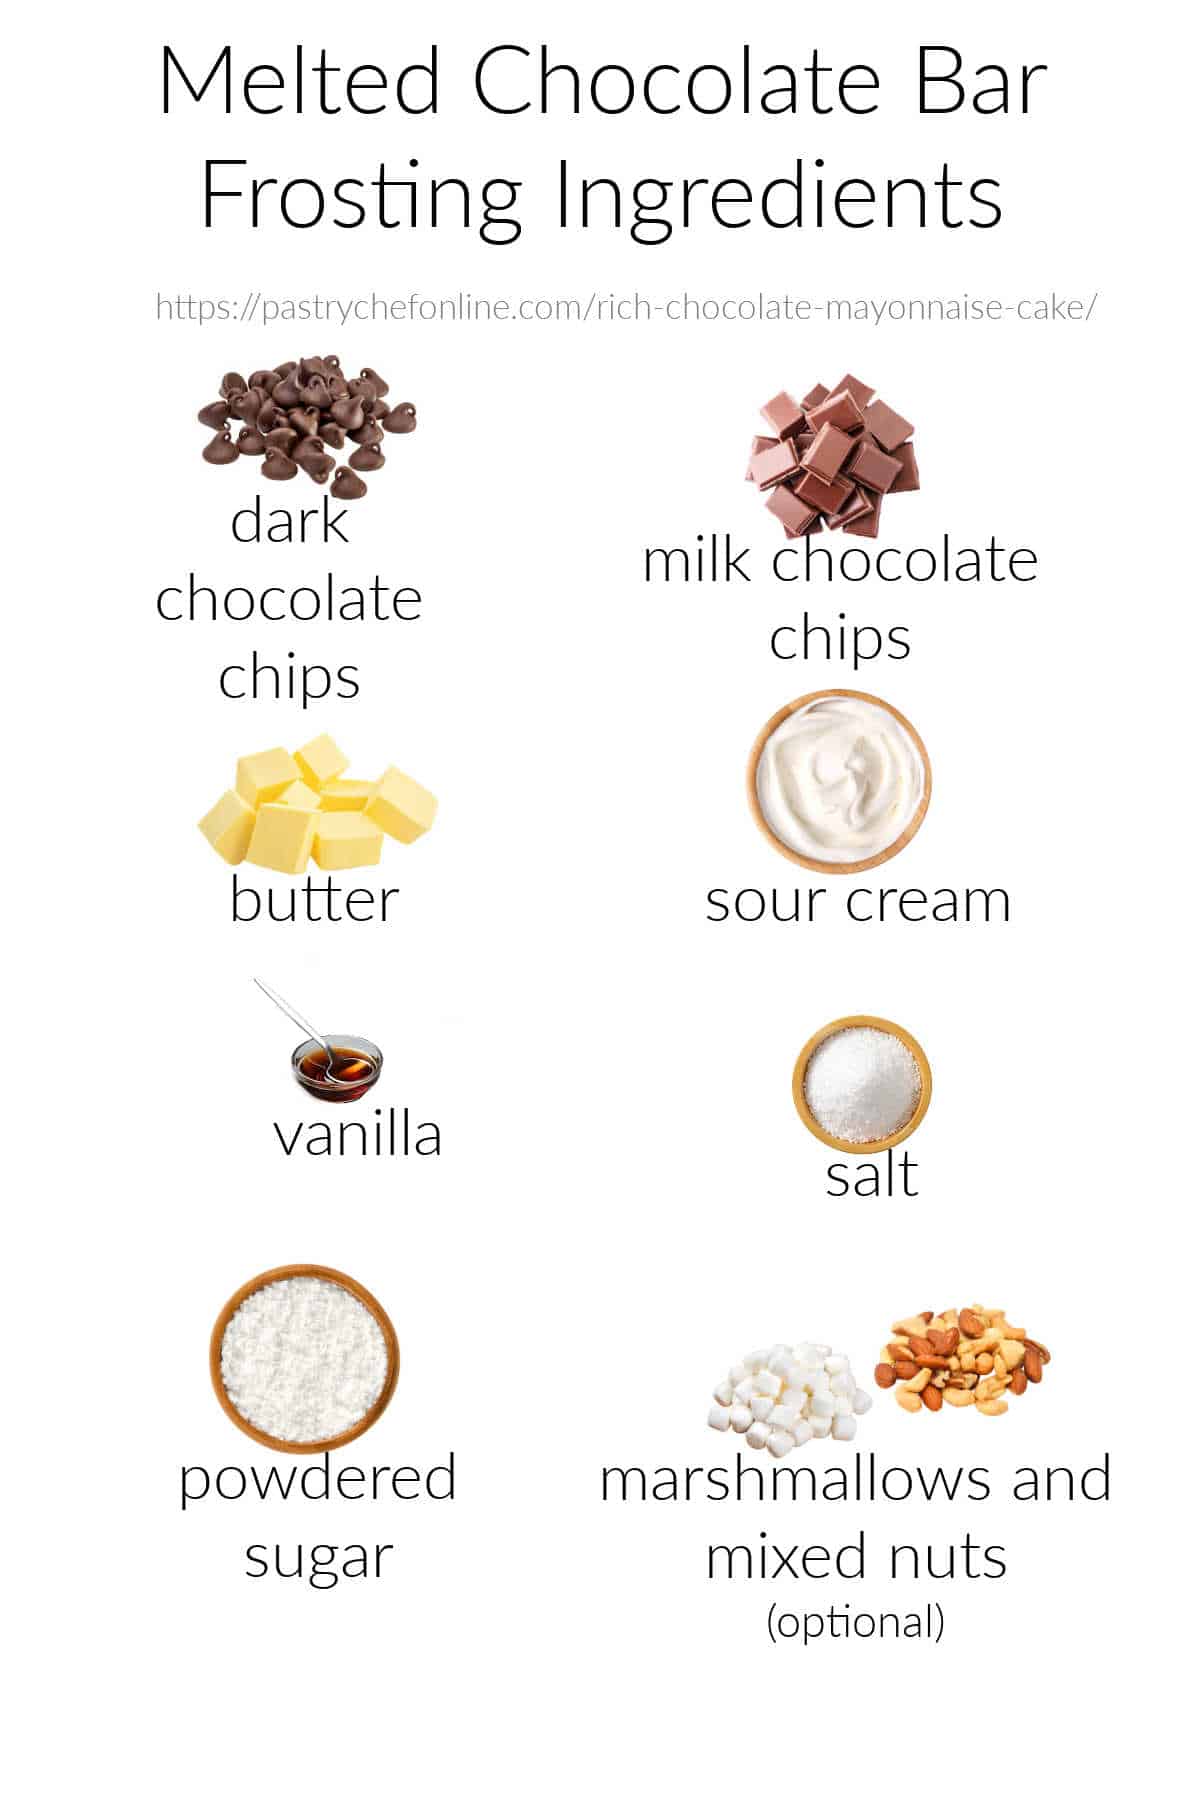 Images of all the ingredients needed for rocky road frosting, labeled and shot on a white background.